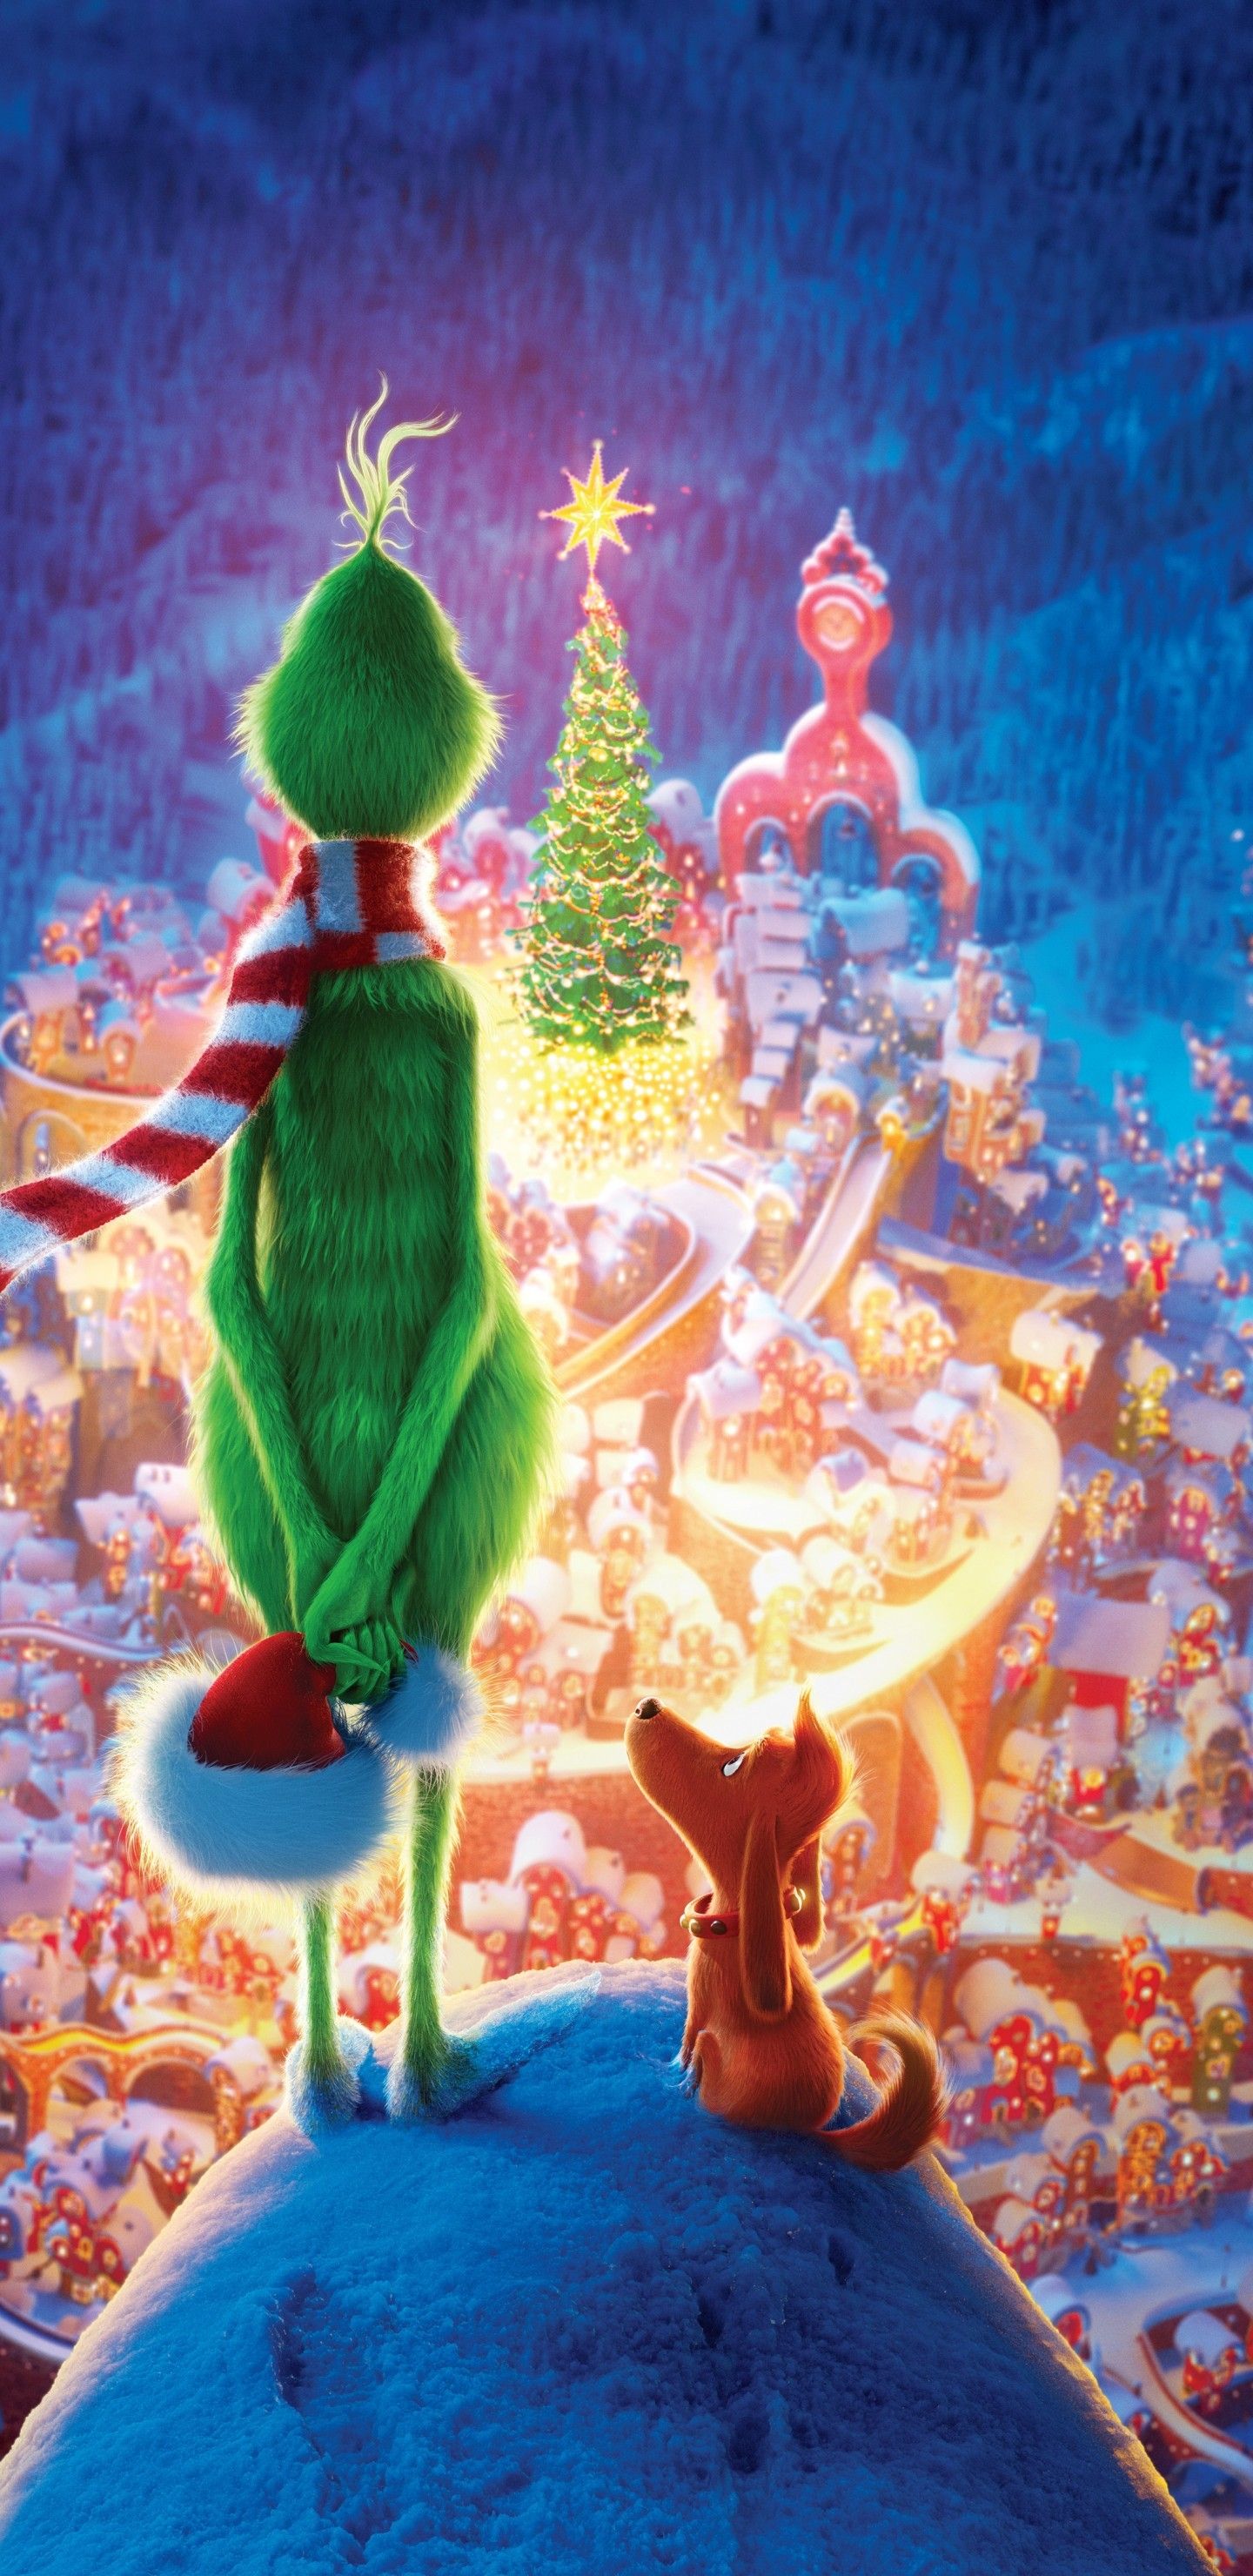 Download 1440x2960 The Grinch, Animation, Christmas Wallpaper for Samsung Galaxy S Note S S8+, Google Pixel 3 XL